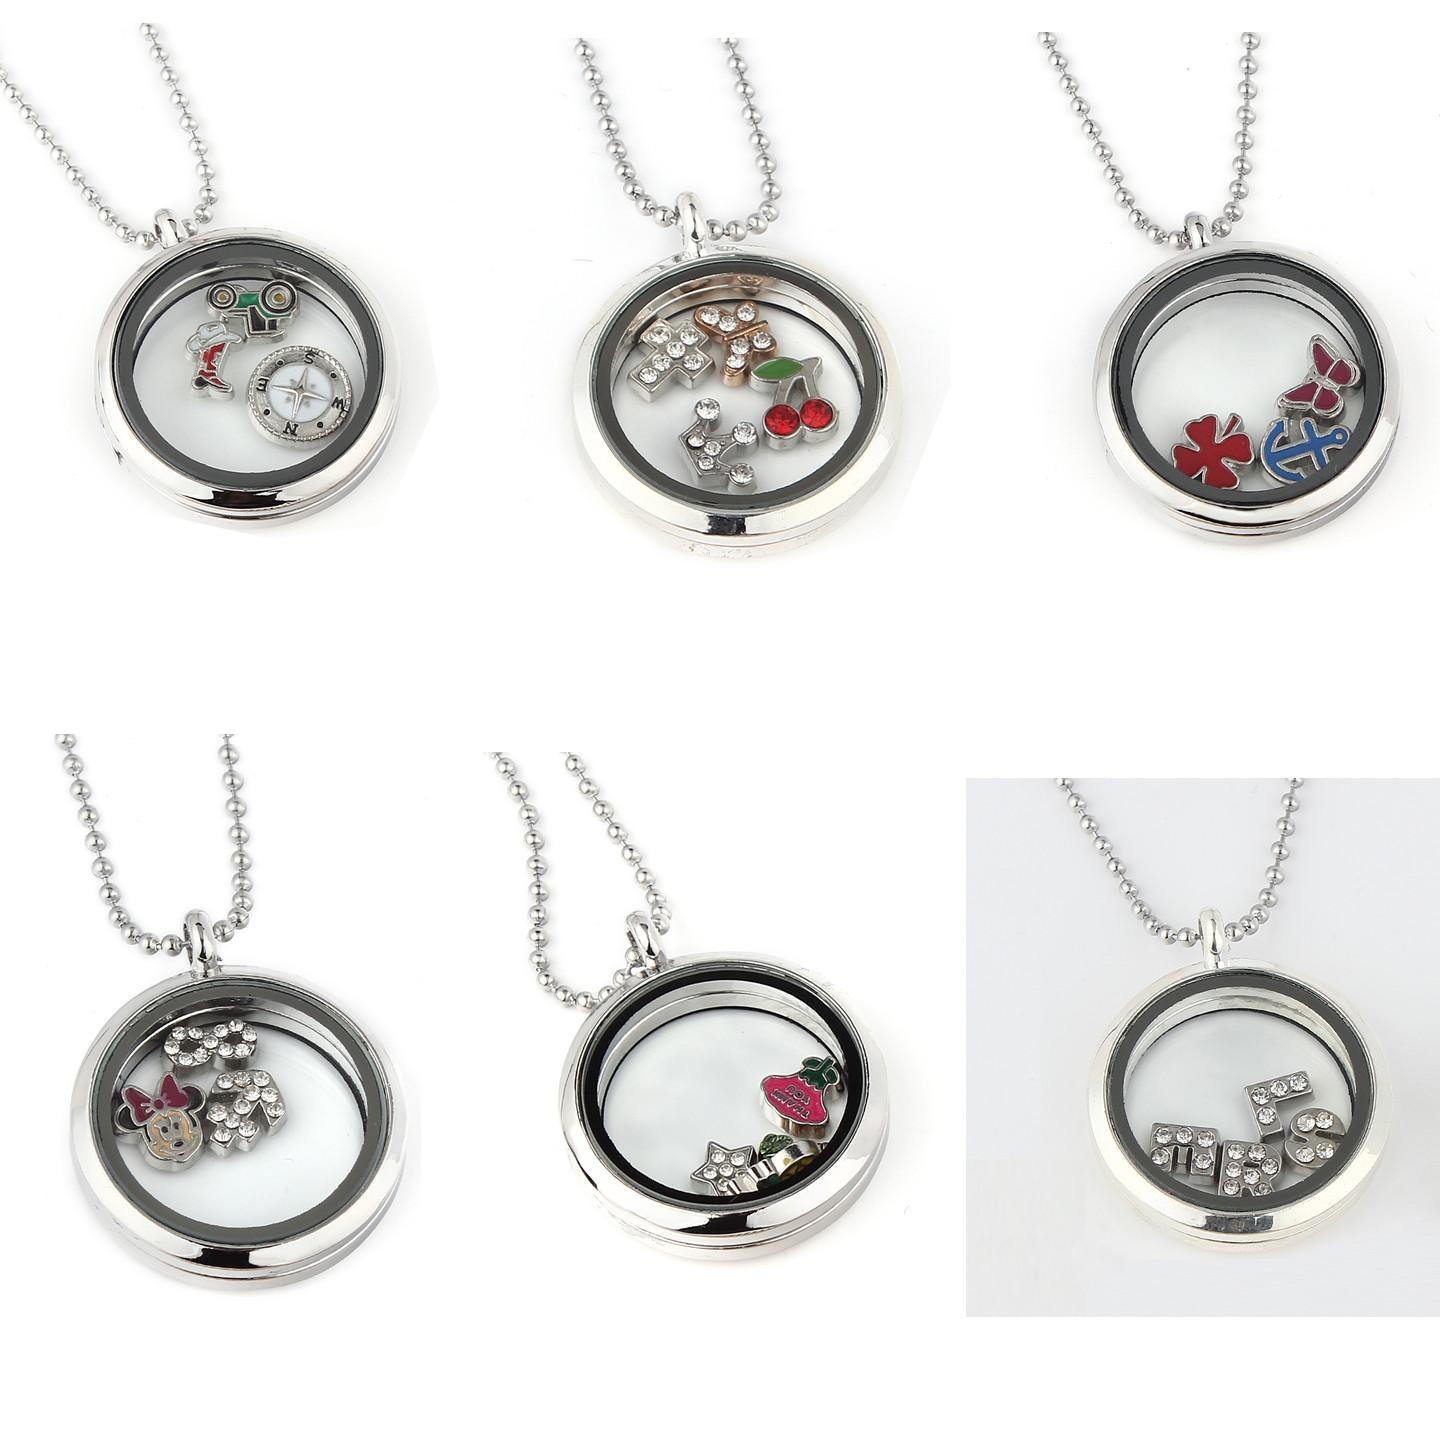 Origami Owl Locket Sizes Wholesale 30mm Round Glass Floating Charms Memory Locket Necklace Origami Owl Jewelry Make Wonderful Gifts Charms For Bracelets Mom Pendant Necklace